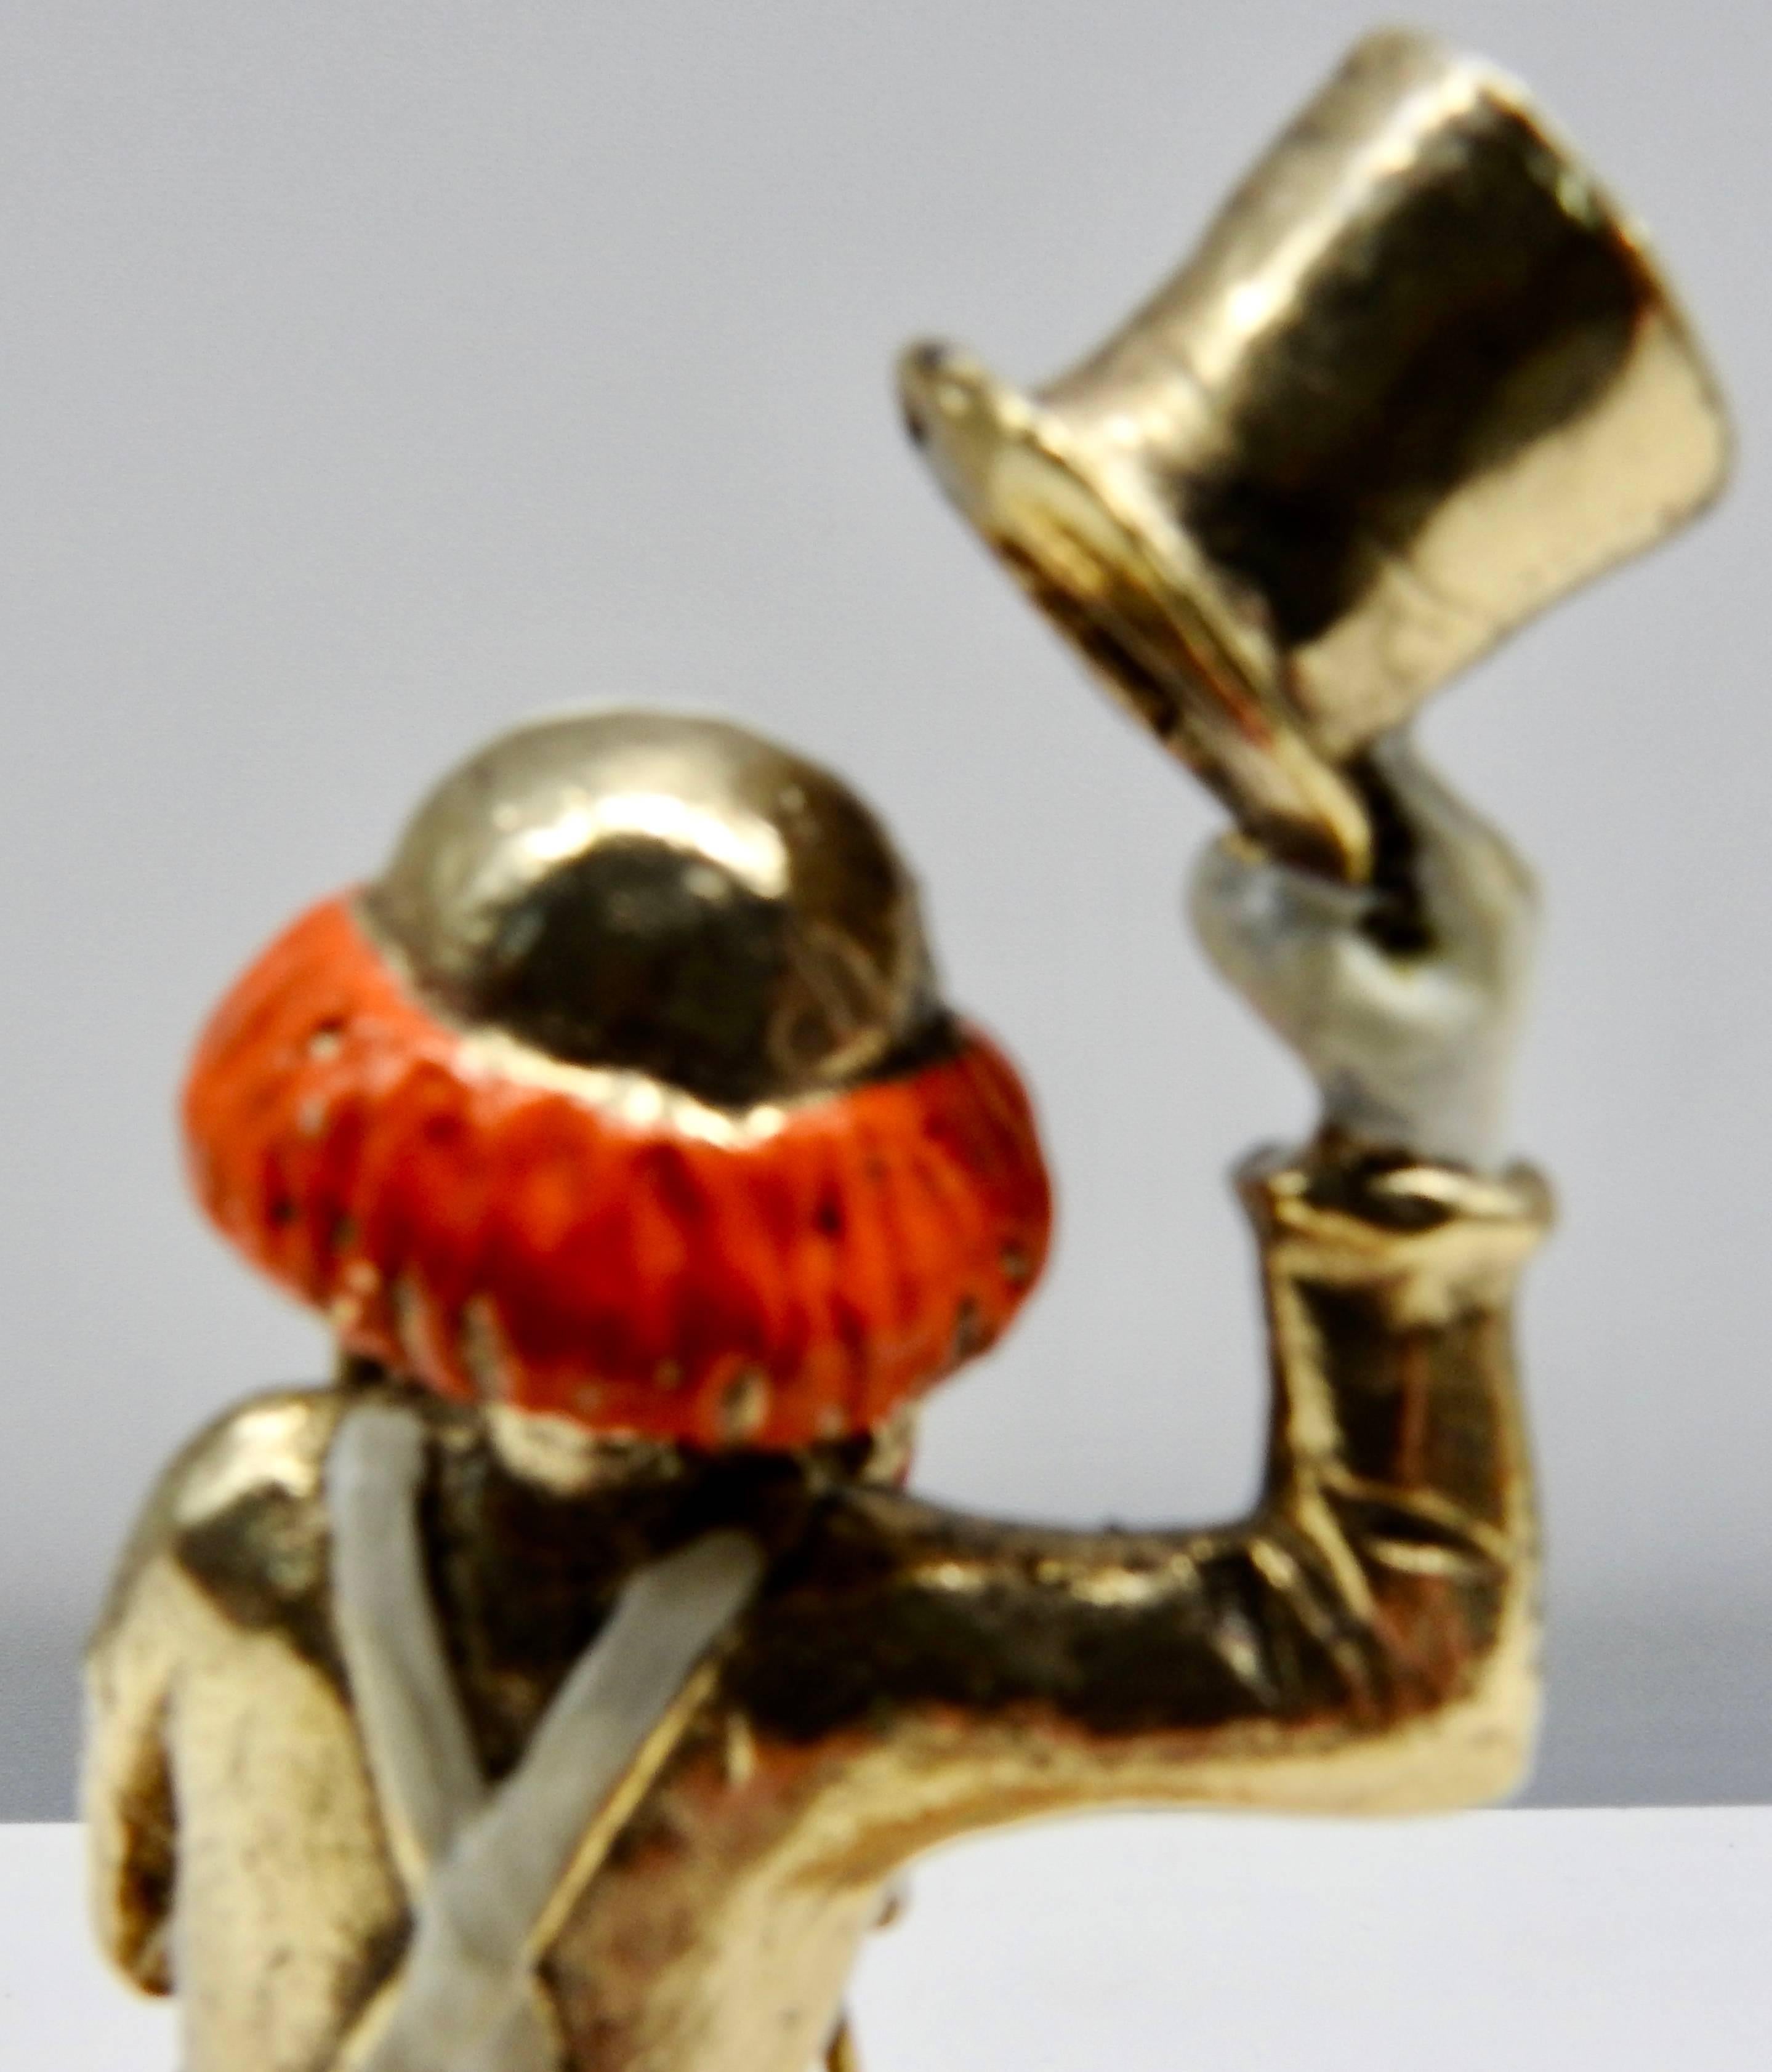 Cast Clown Sculpture with Cane and Top Hat by Ron Lee, 1979 For Sale